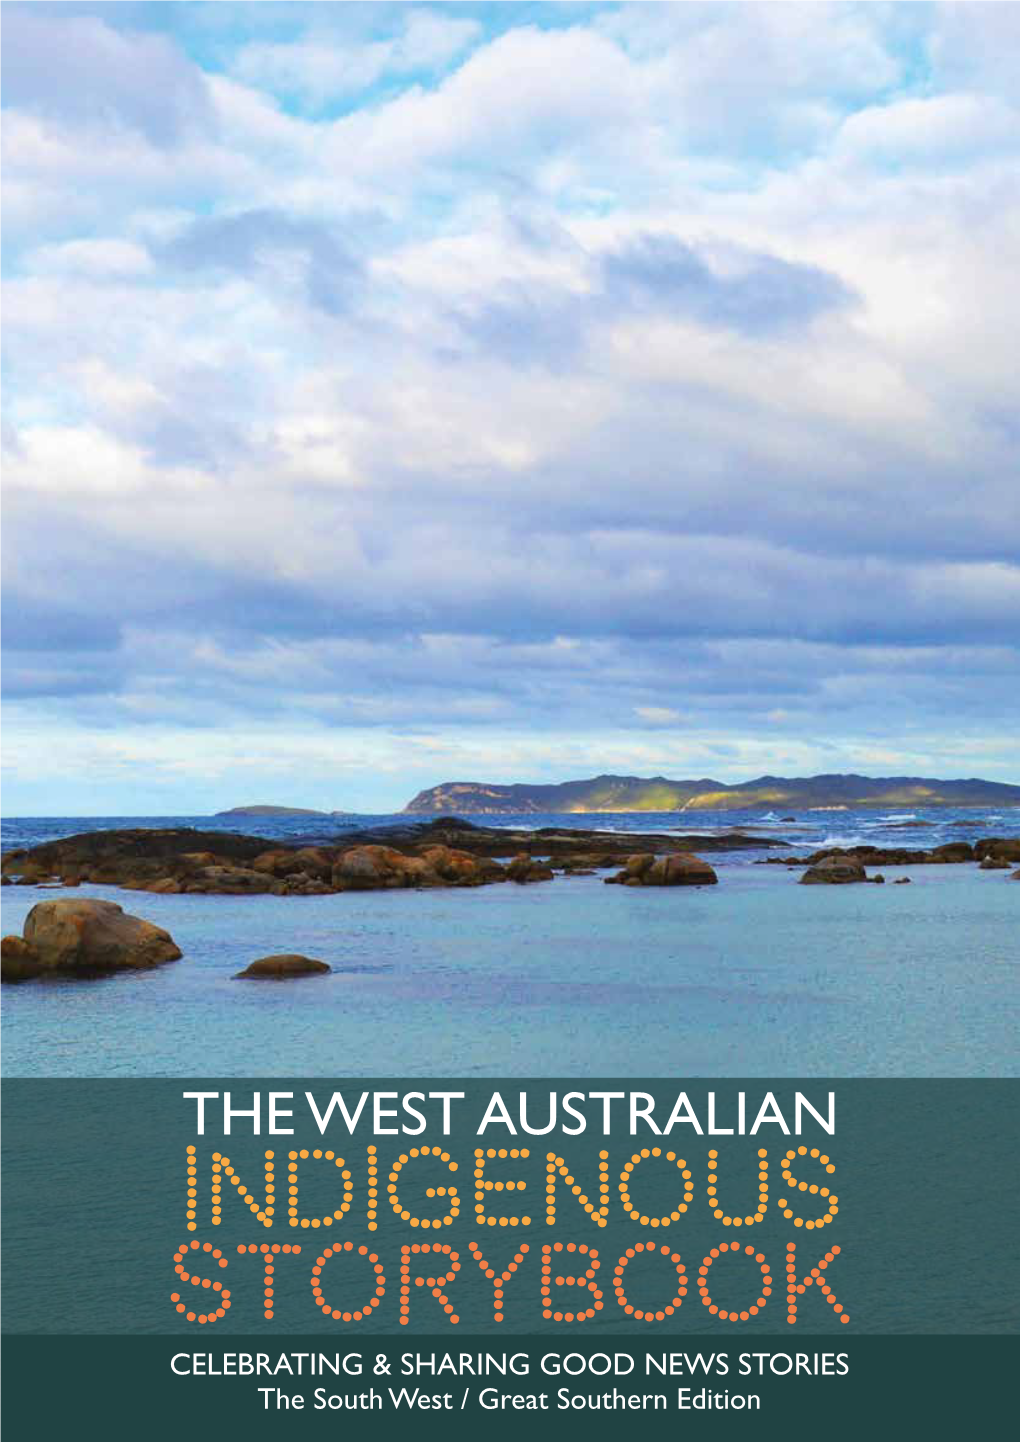 INDIGENOUS STORYBOOK CELEBRATING & SHARING GOOD NEWS STORIES the South West / Great Southern Edition the WEST AUSTRALIAN INDIGENOUS STORYBOOK CONTENTS